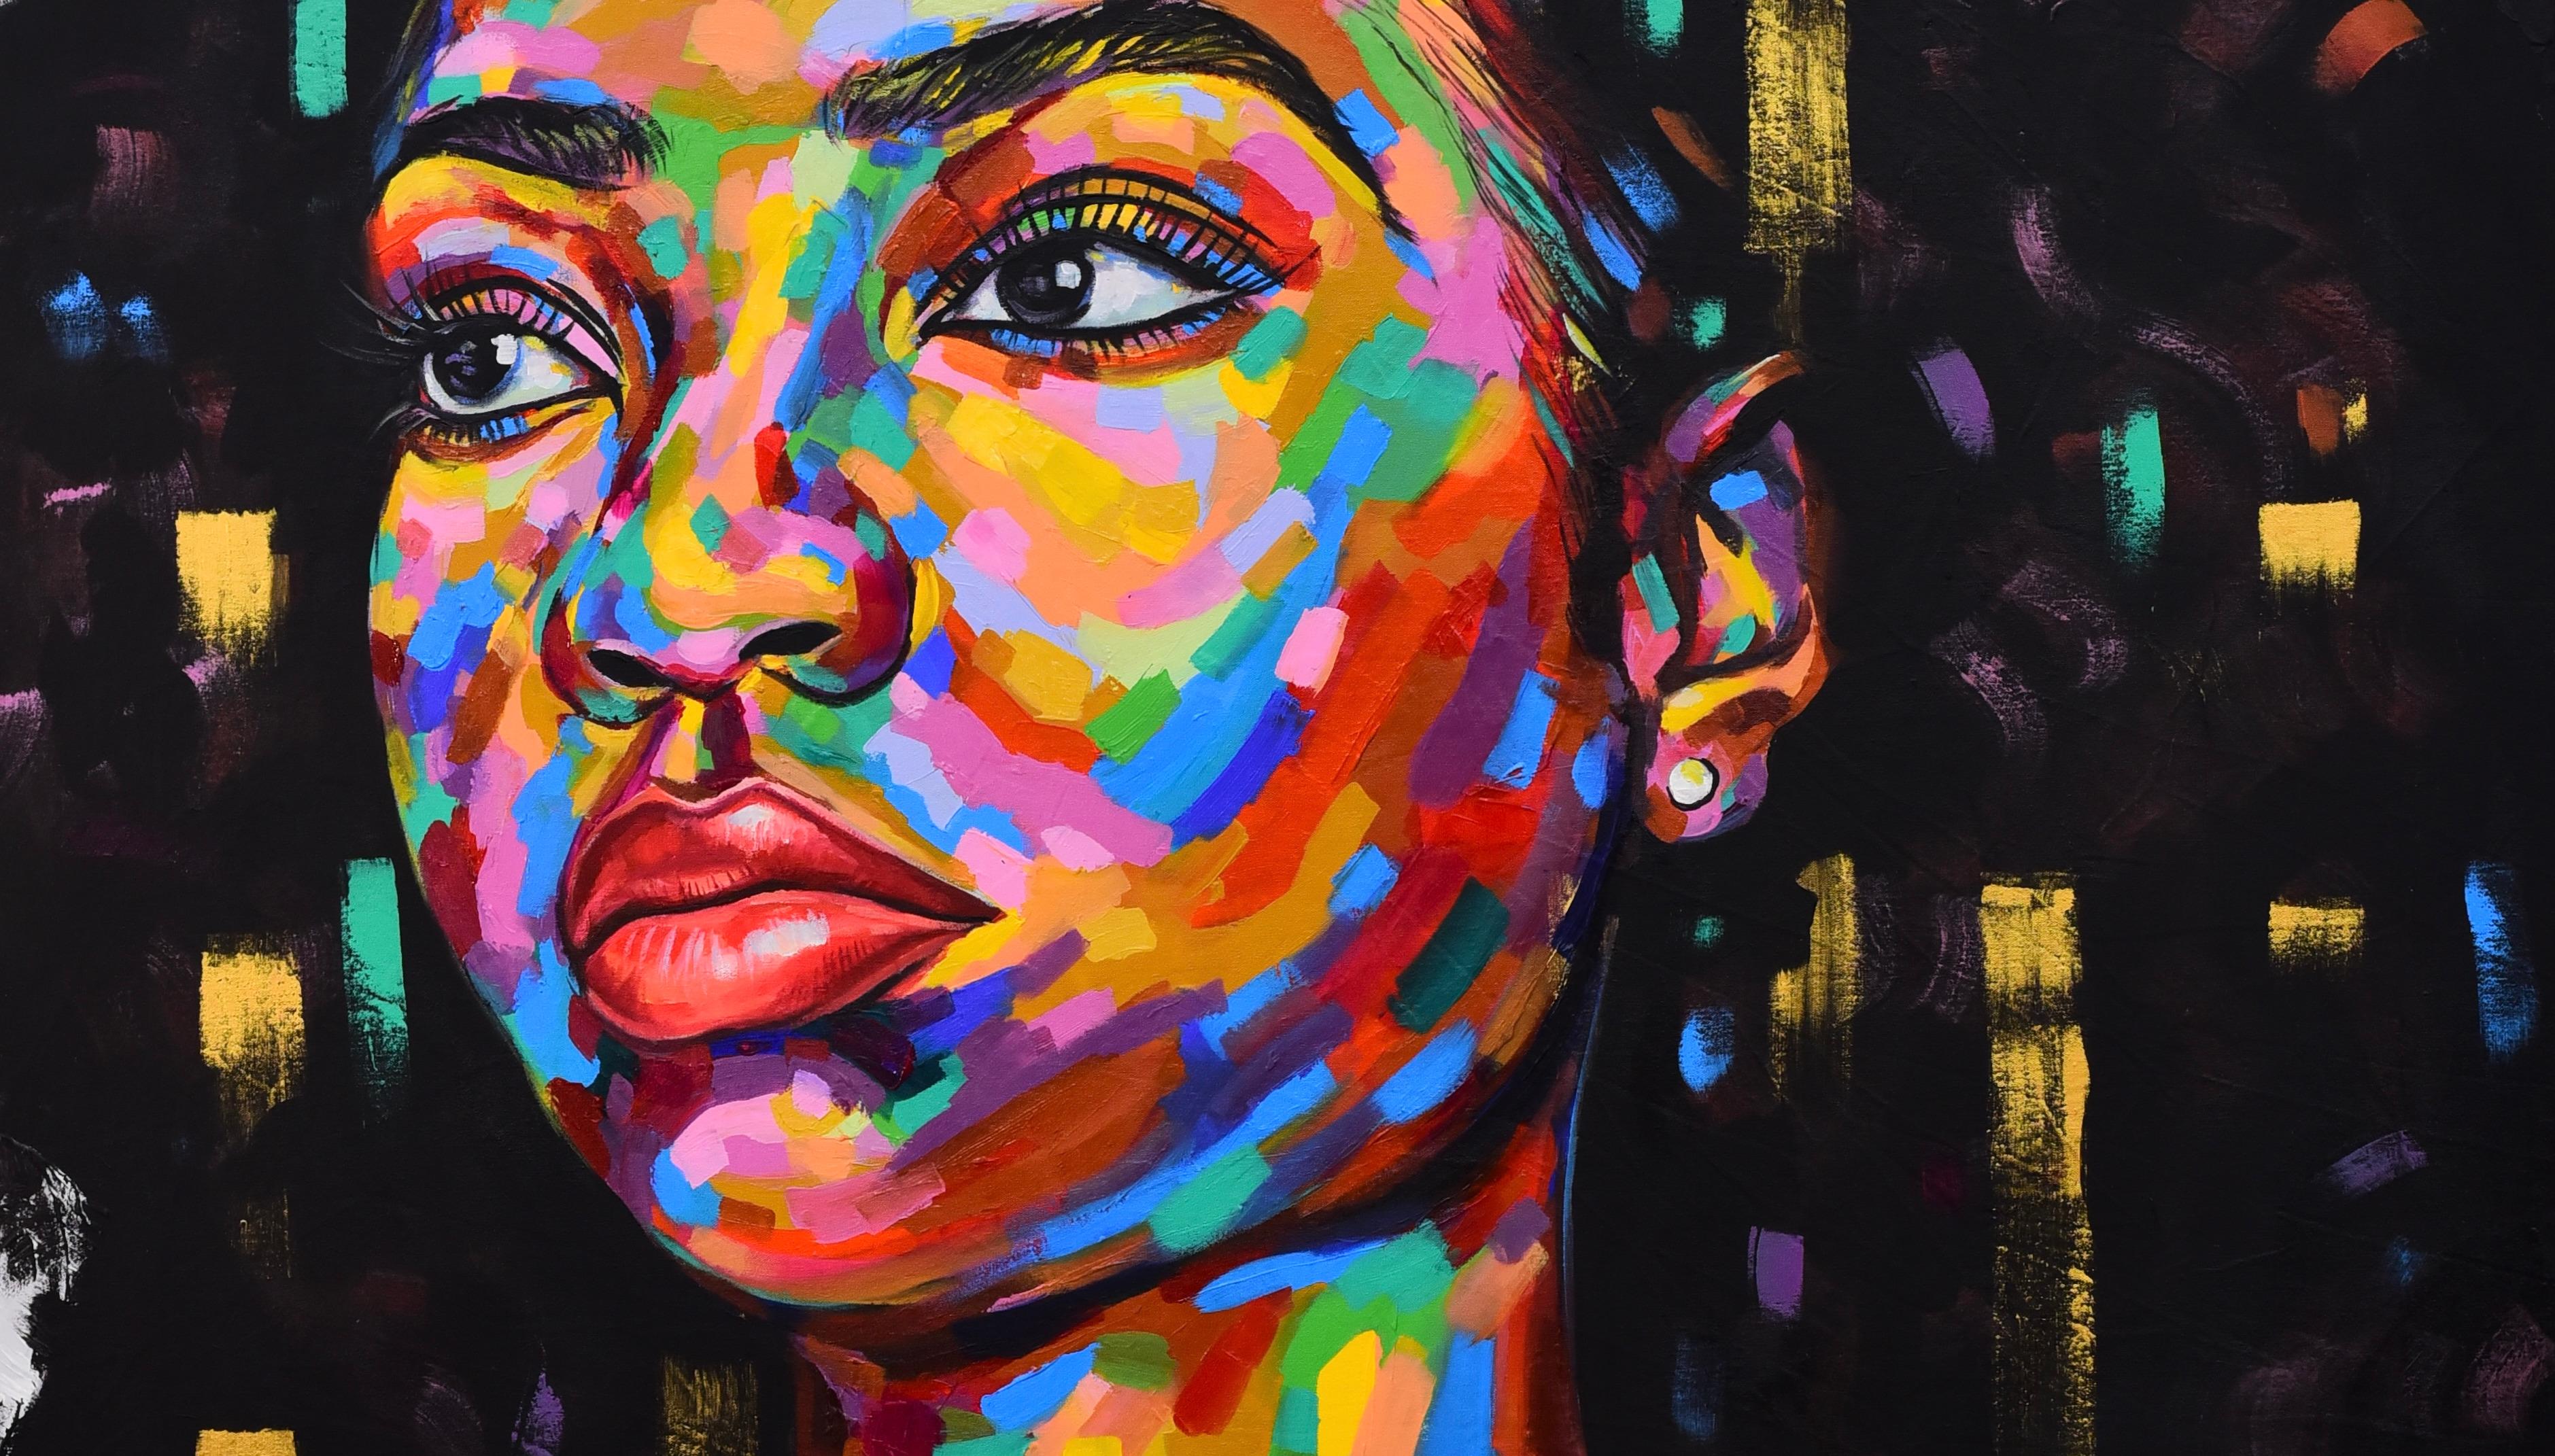 I was inspired to paint the portrait of an African girl, so people could see life through her lens. For you to see what it is for a disadvantaged, underprivileged child growing up in a world that doesn't care about them. Yet despite all of this,